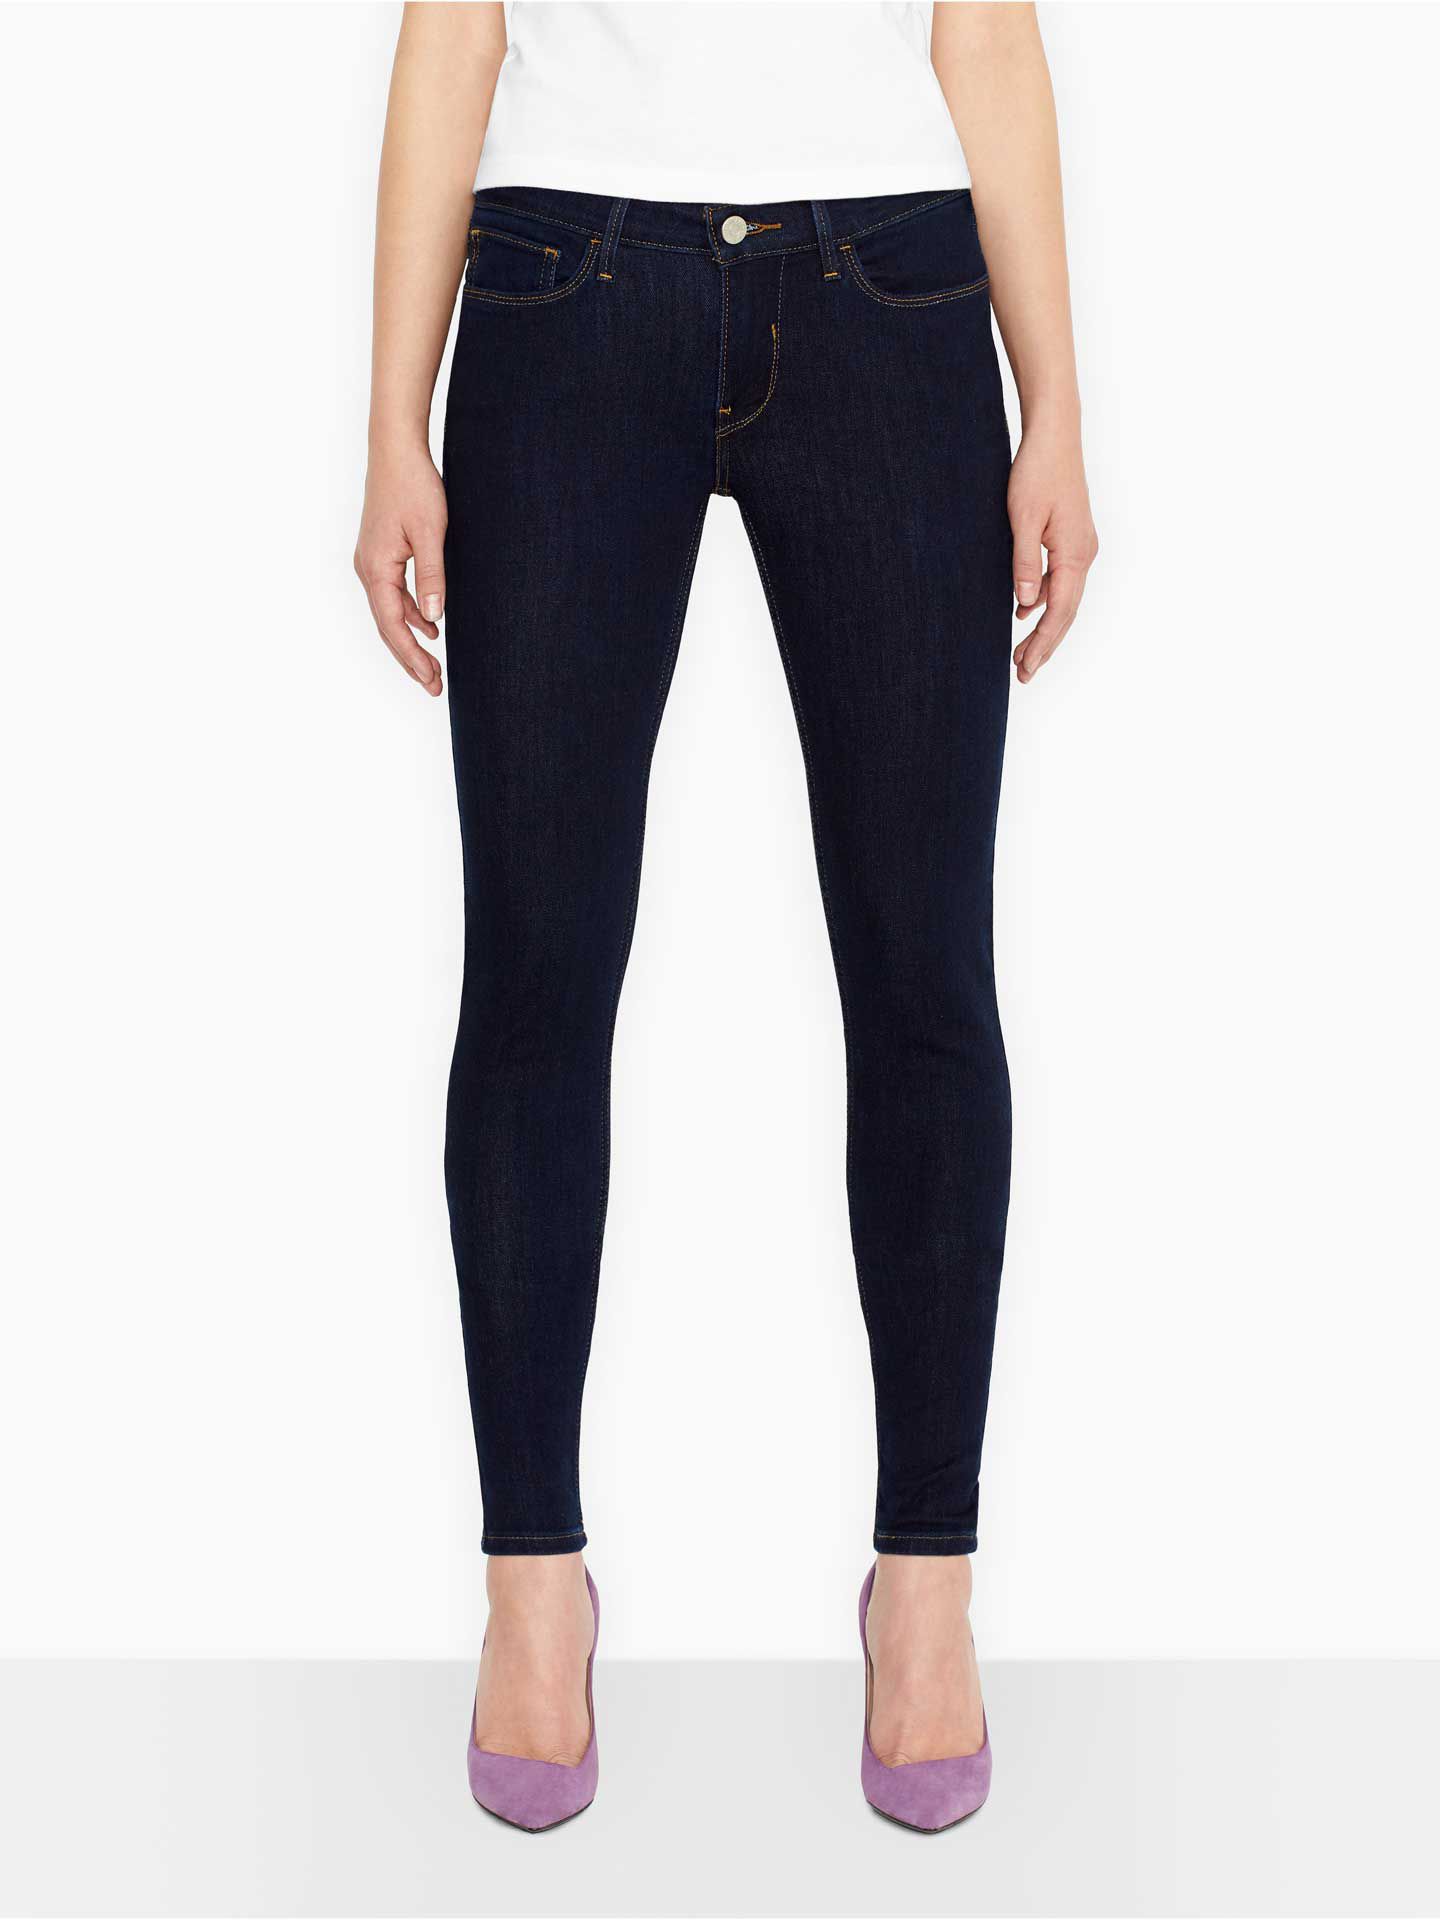 Levi's 535 Super Skinny Jeans - Canal, Canal, 1M 